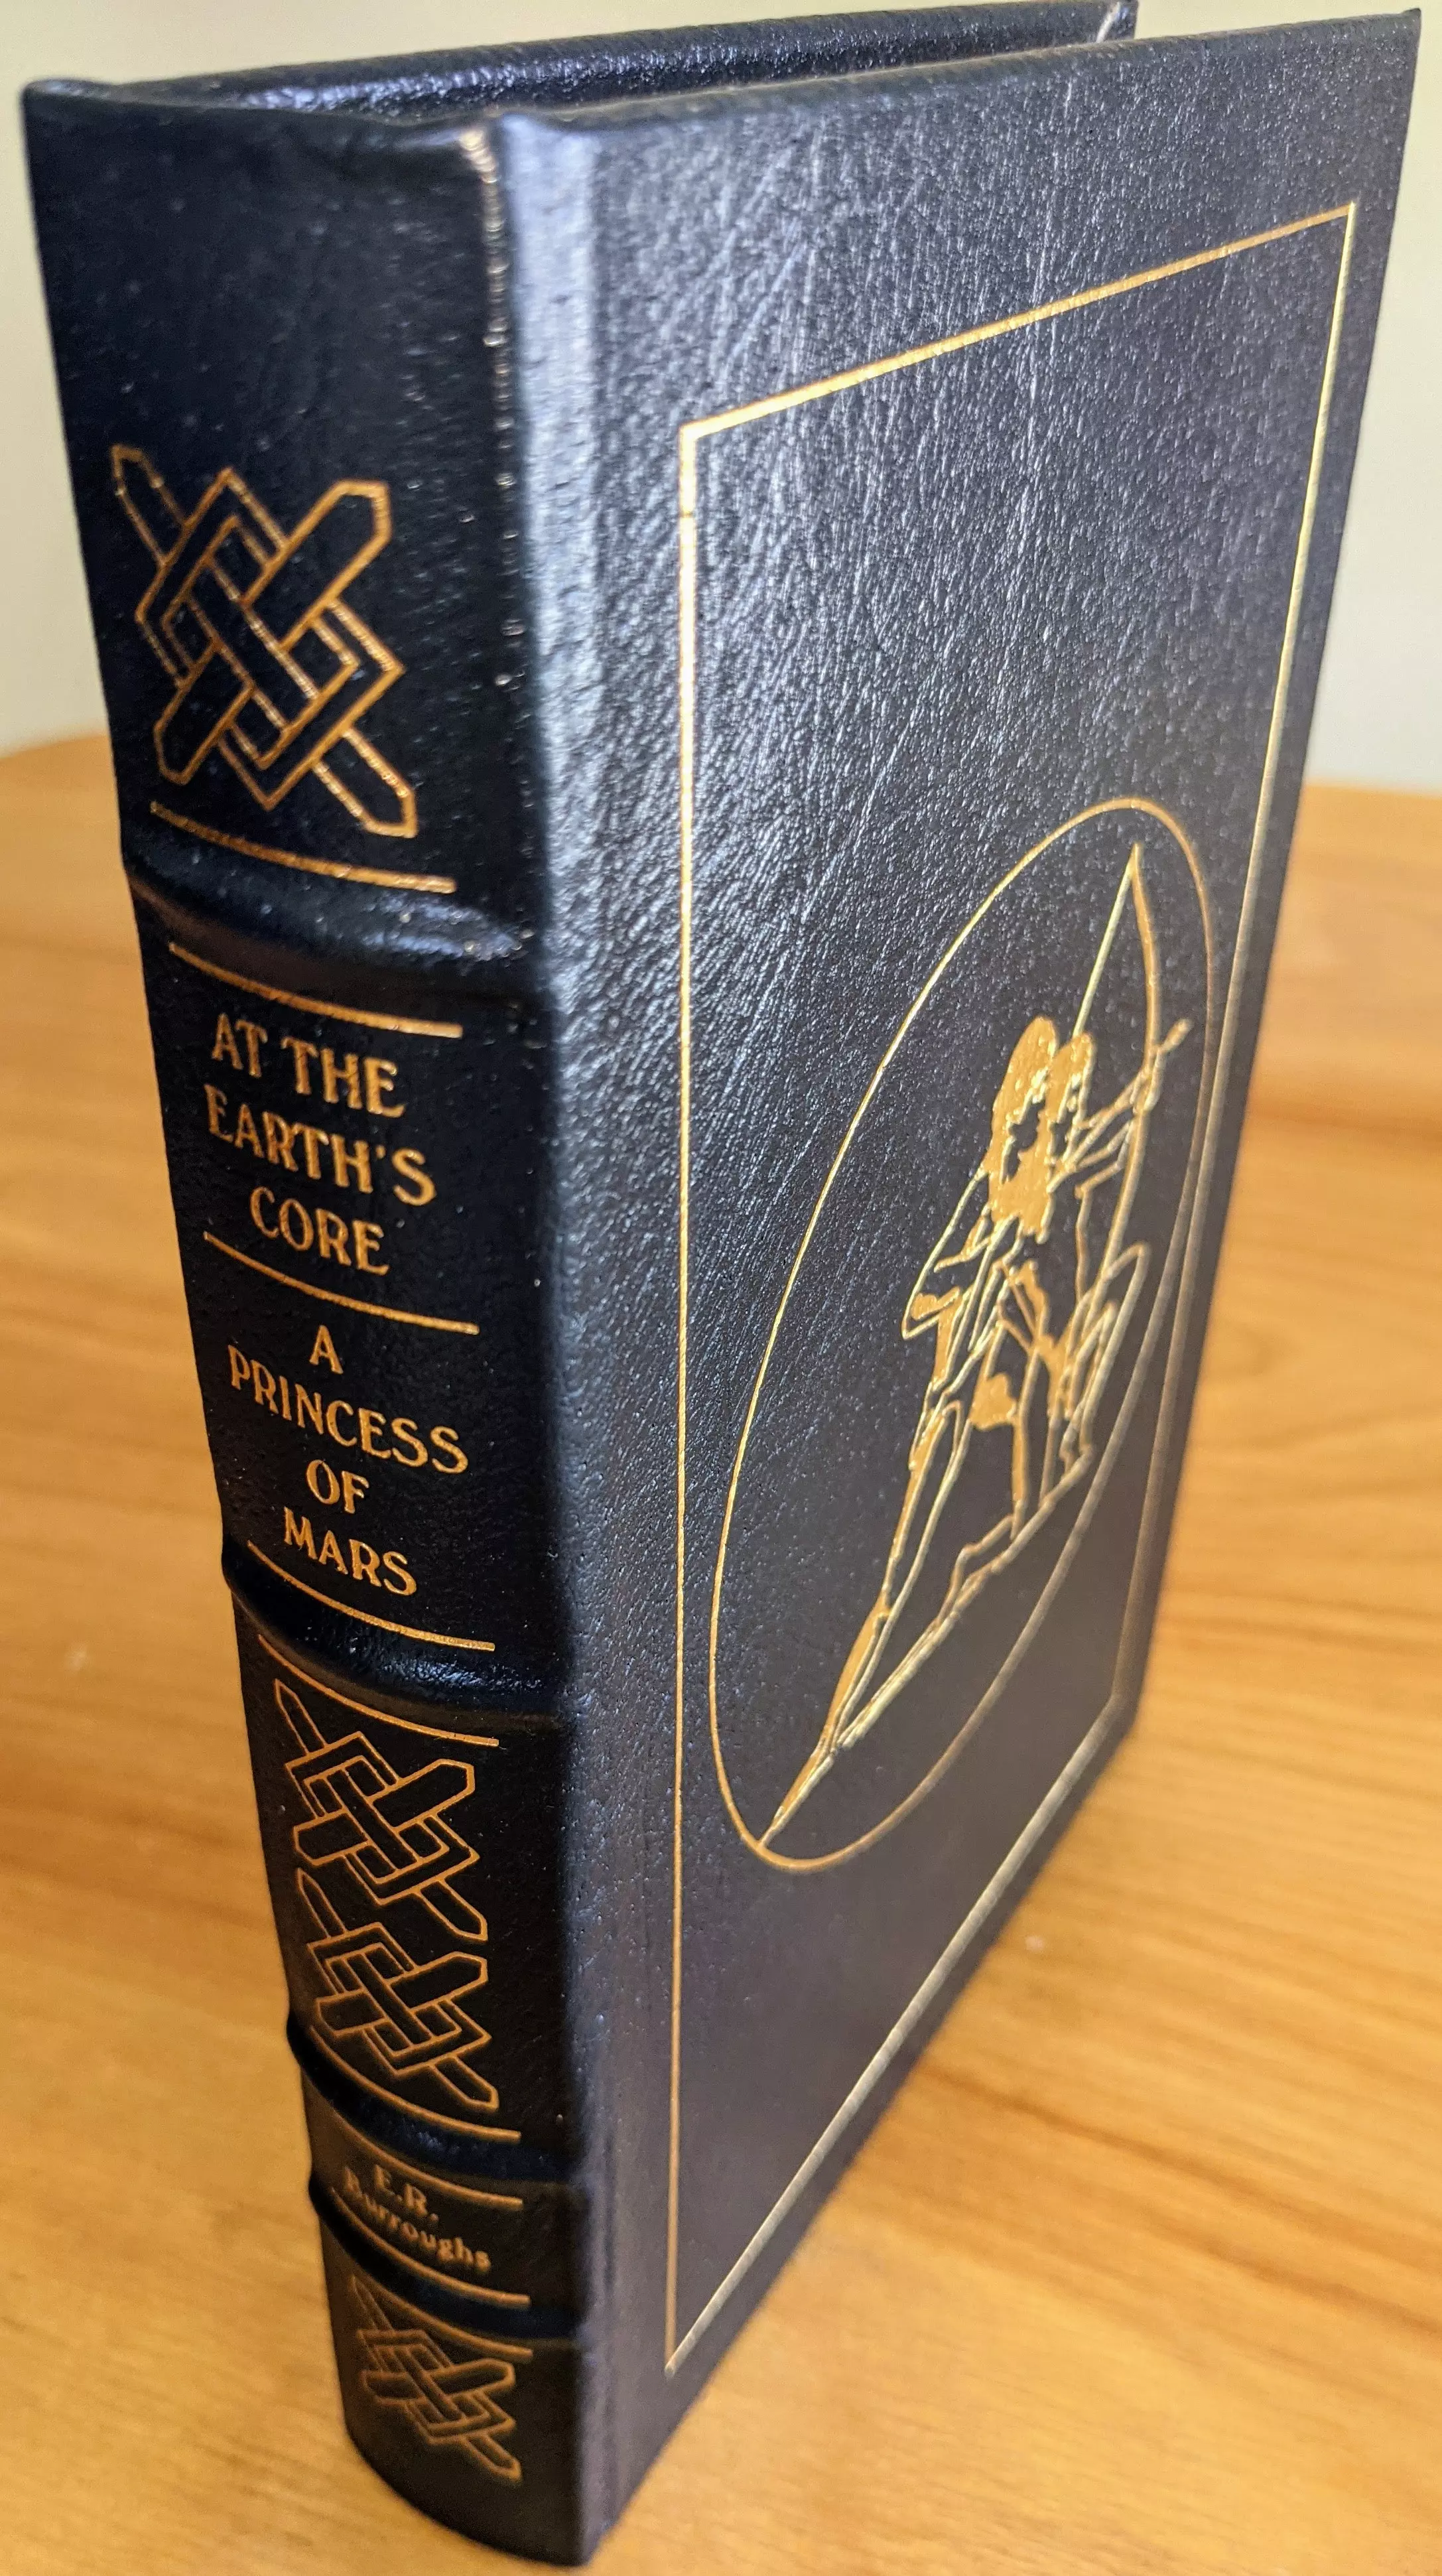 Stunning Navy Blue Leather Bound hardback book with hubbed spine, cover artwork in 22kt gold, printed on archival paper with gold gilded edges, smyth sewing & concealed muslin joints
	  - original artwork by Ron Miller